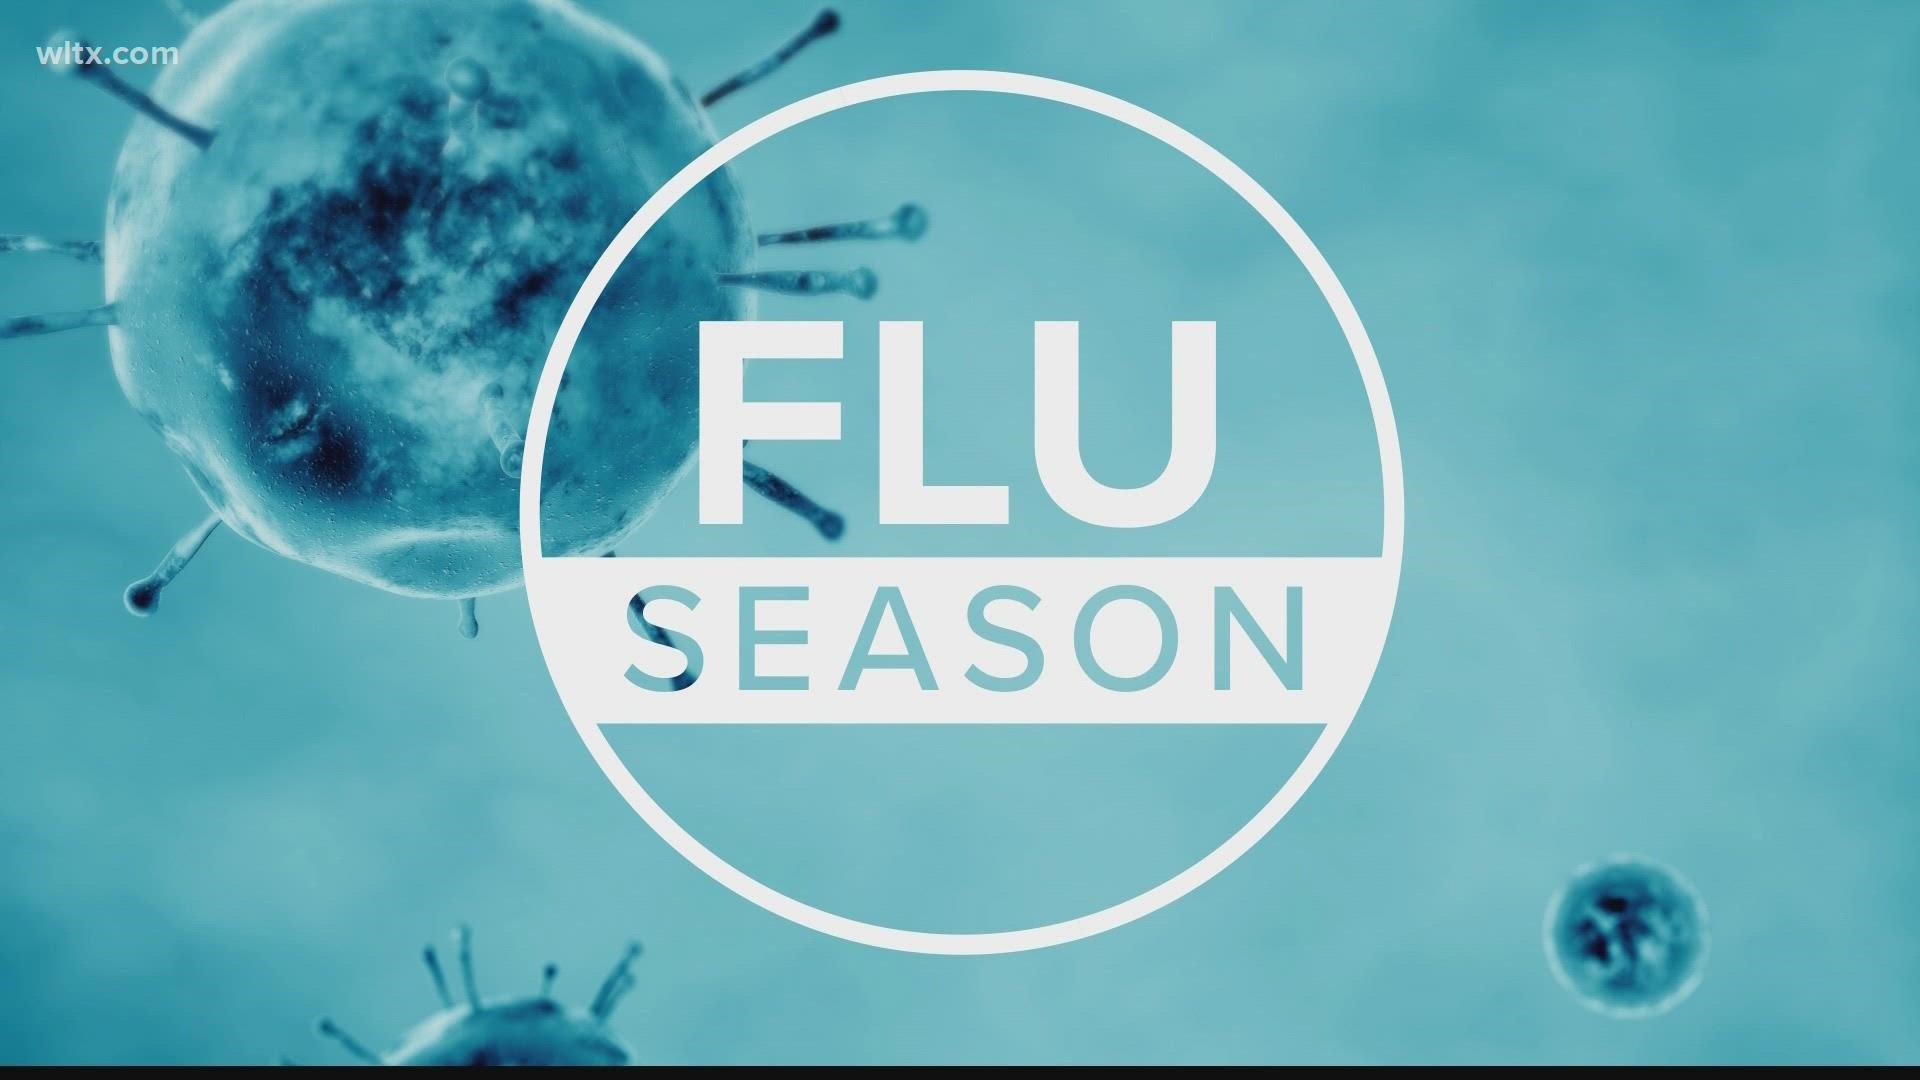 South Carolina's health agency has confirmed the first flu-related death in the state for the current season.